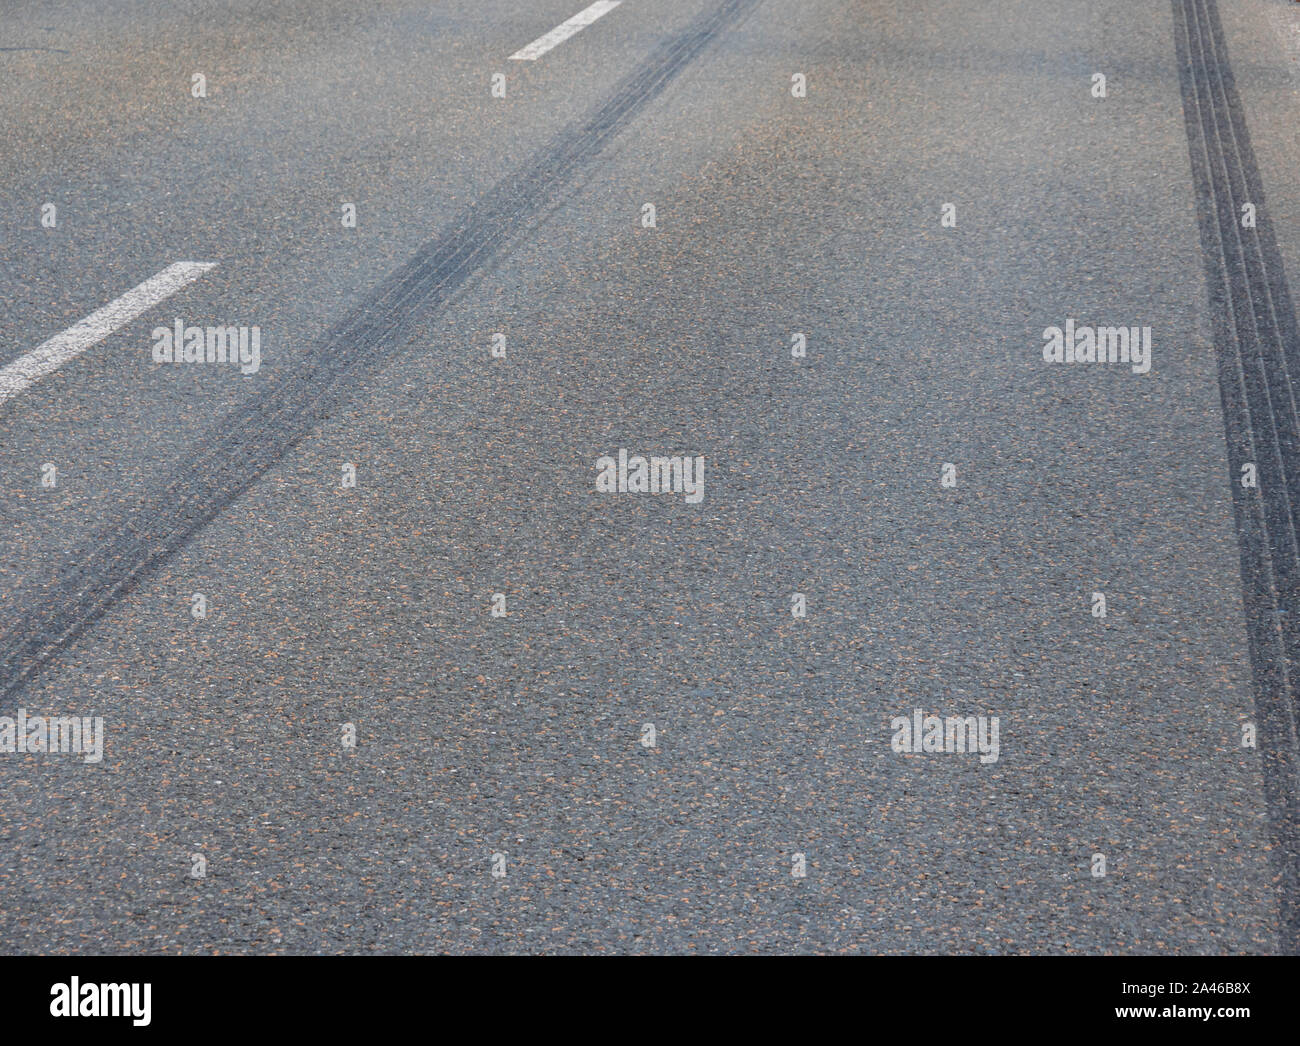 Skid mark after car accident on the street Stock Photo